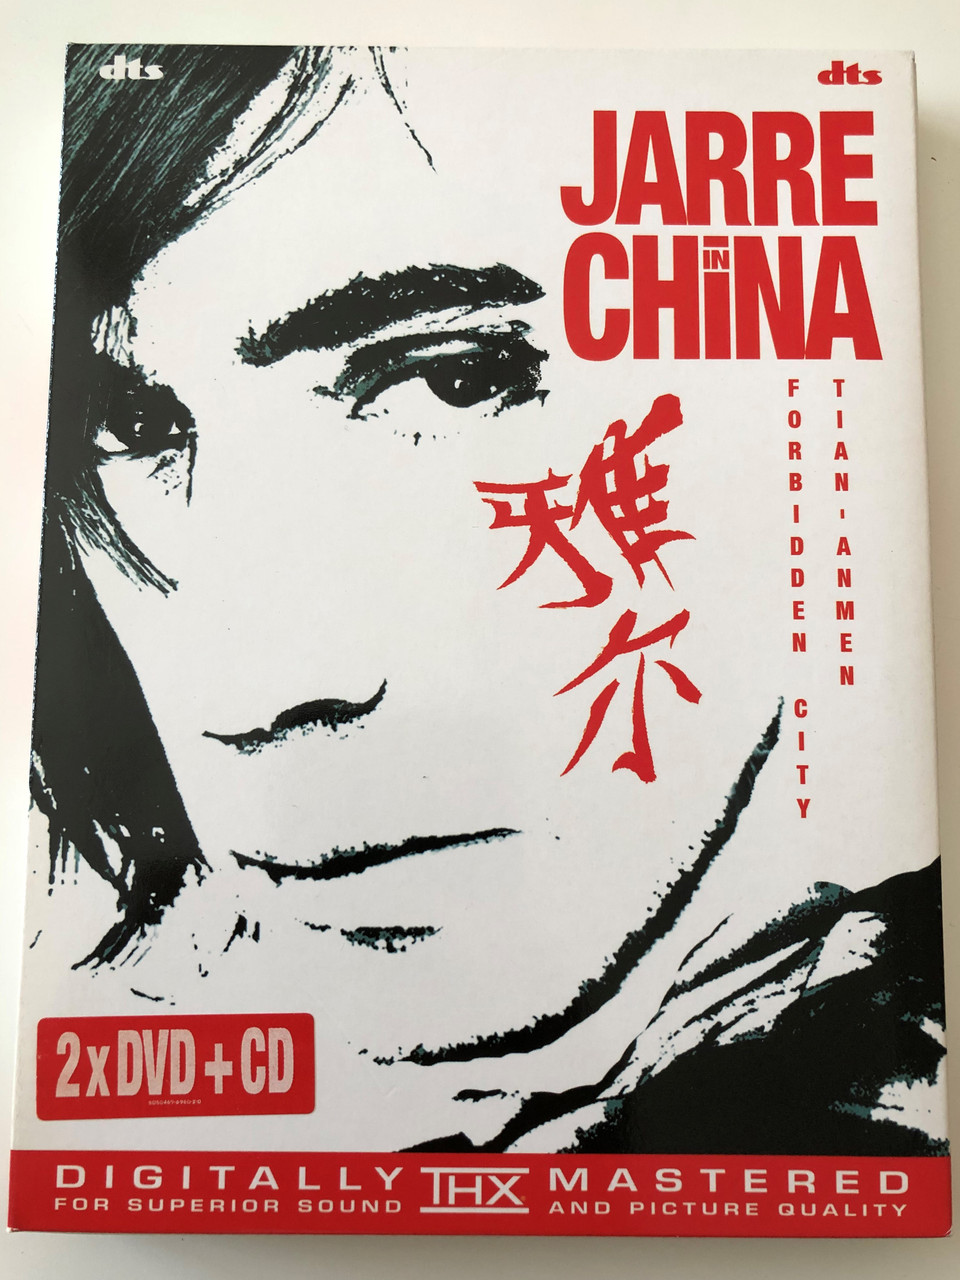 Jarre in China DVD Forbidden City - Tian'anmen / 2xDVD & CD 2004 / Jean  Michel Jarre / Accompanied by 260 Musicians - Beijing Symphony Orchestra,  Beijing National Orchestra, Chinese National Orchestra - bibleinmylanguage